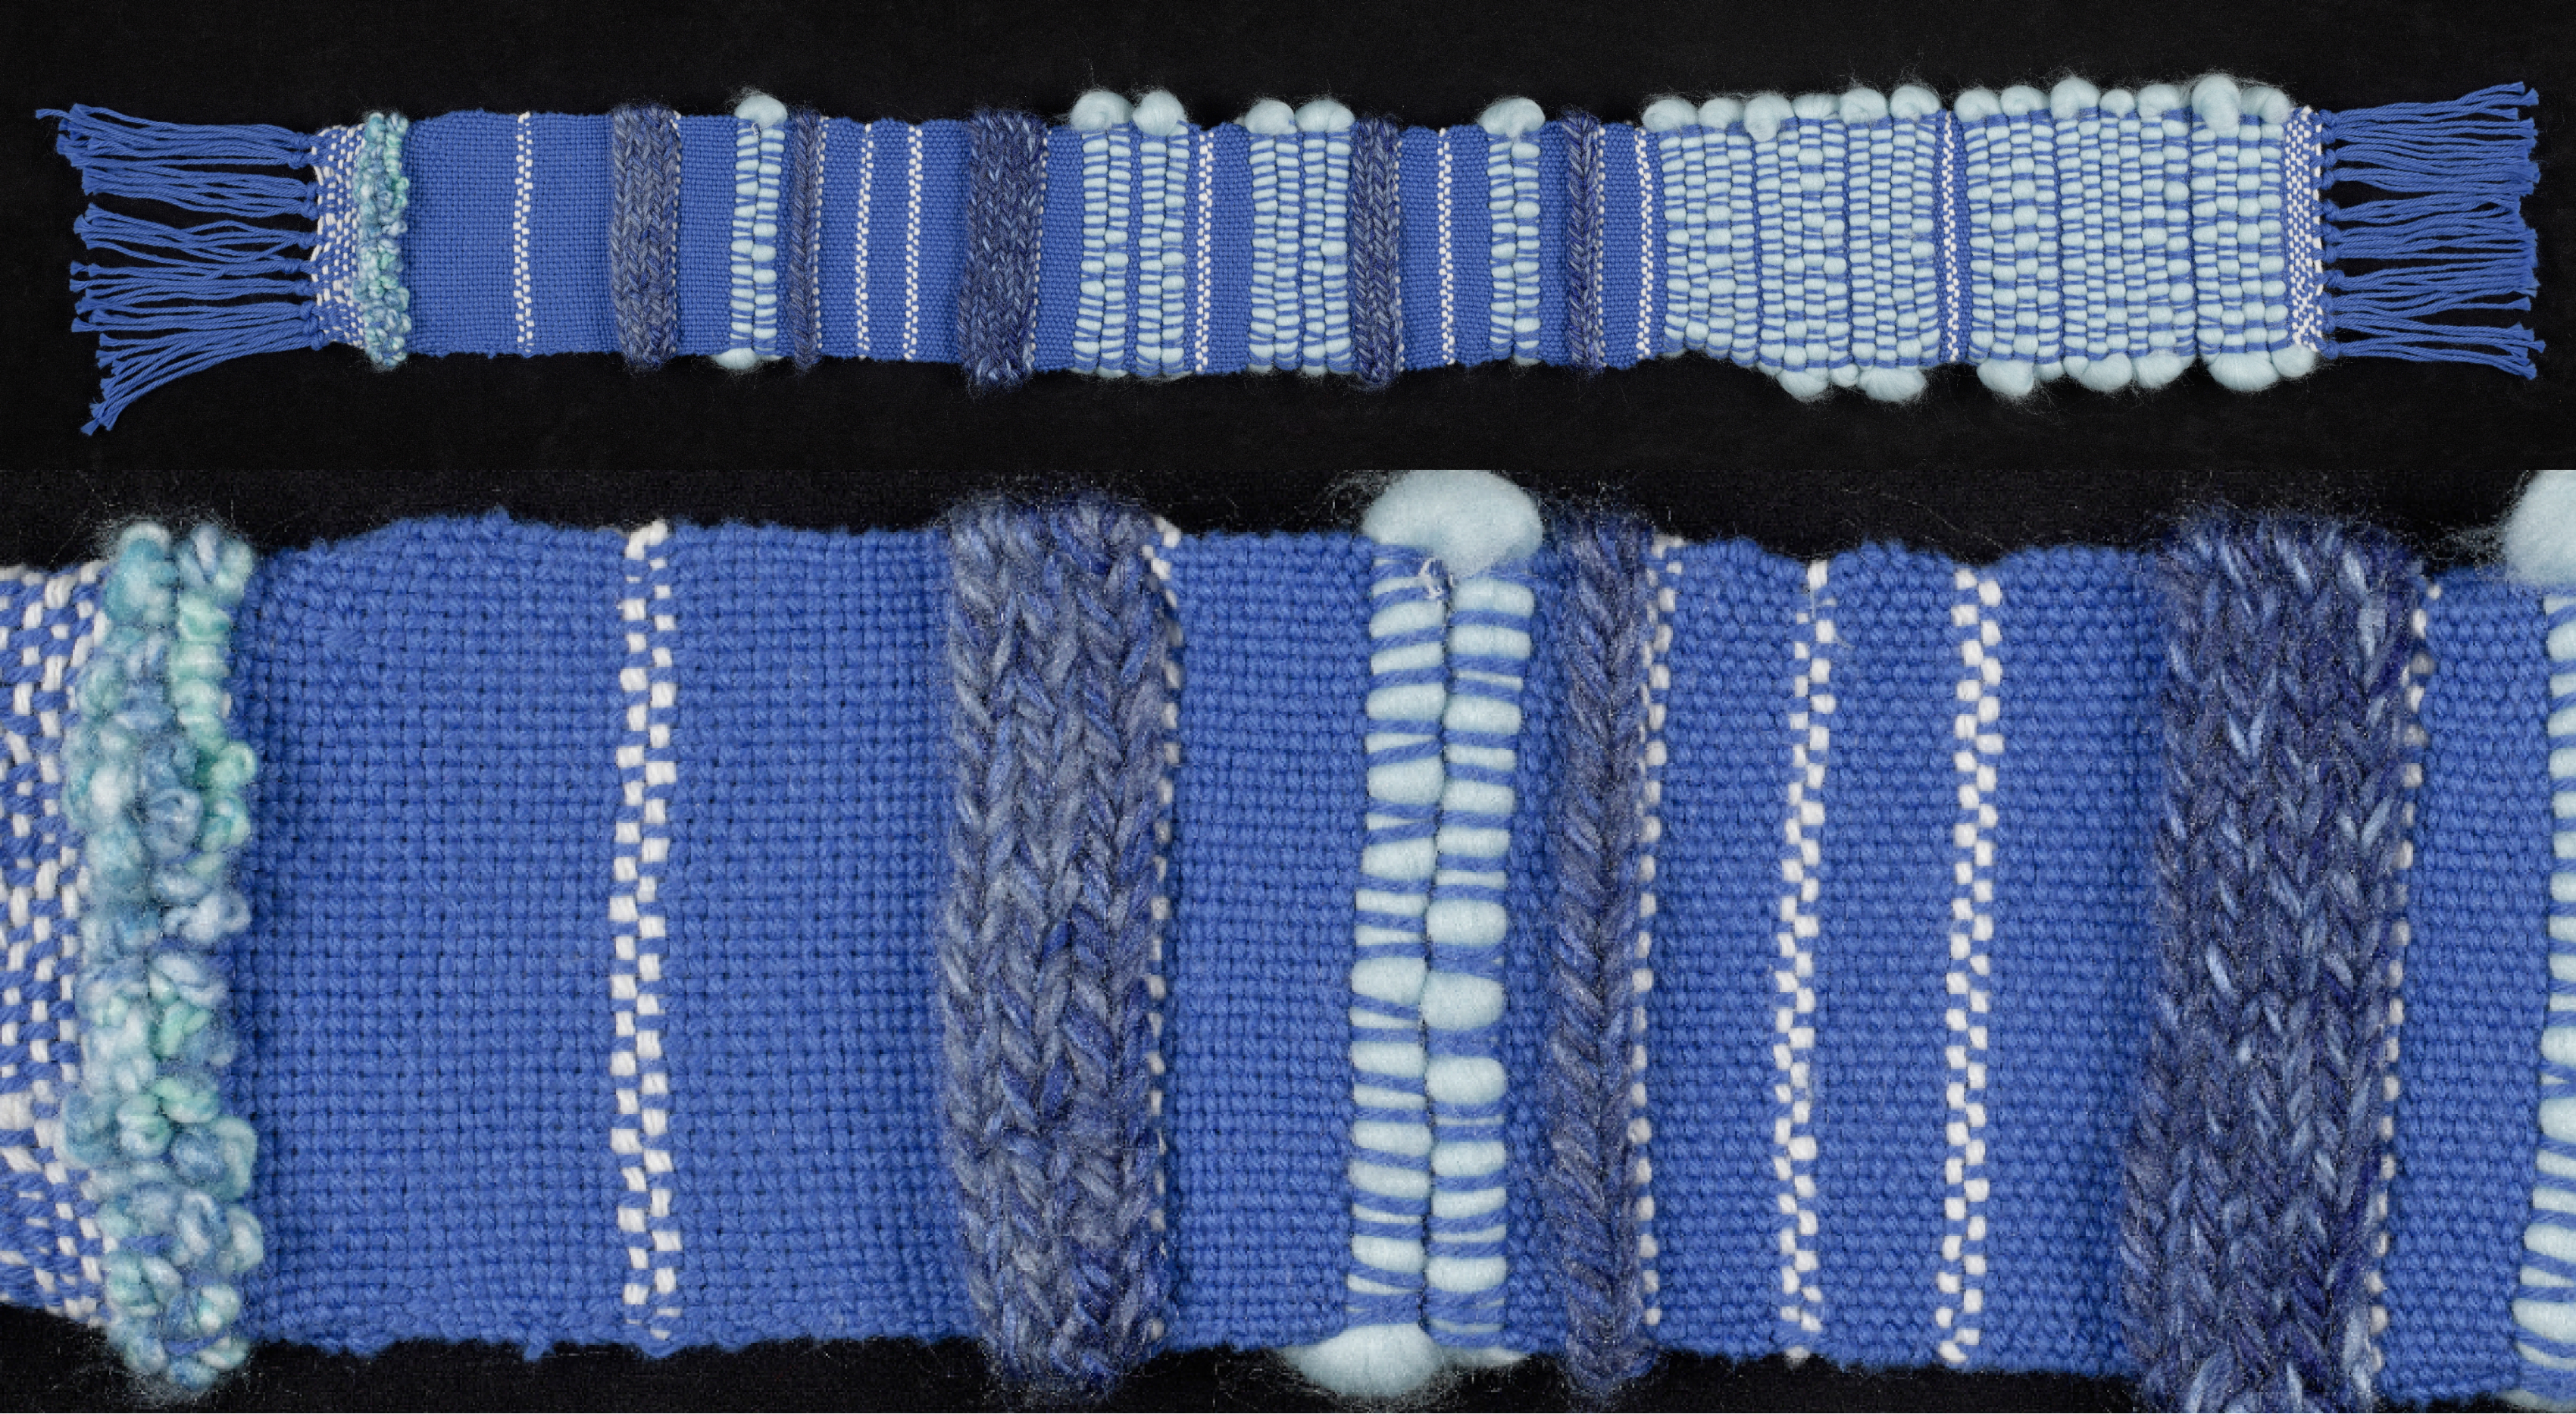 Composite of two images from the high resolution image shown in the deep zoom viewer: one showing the full length of the woven piece, and another with a close-up showing the threads and different weaving patterns.